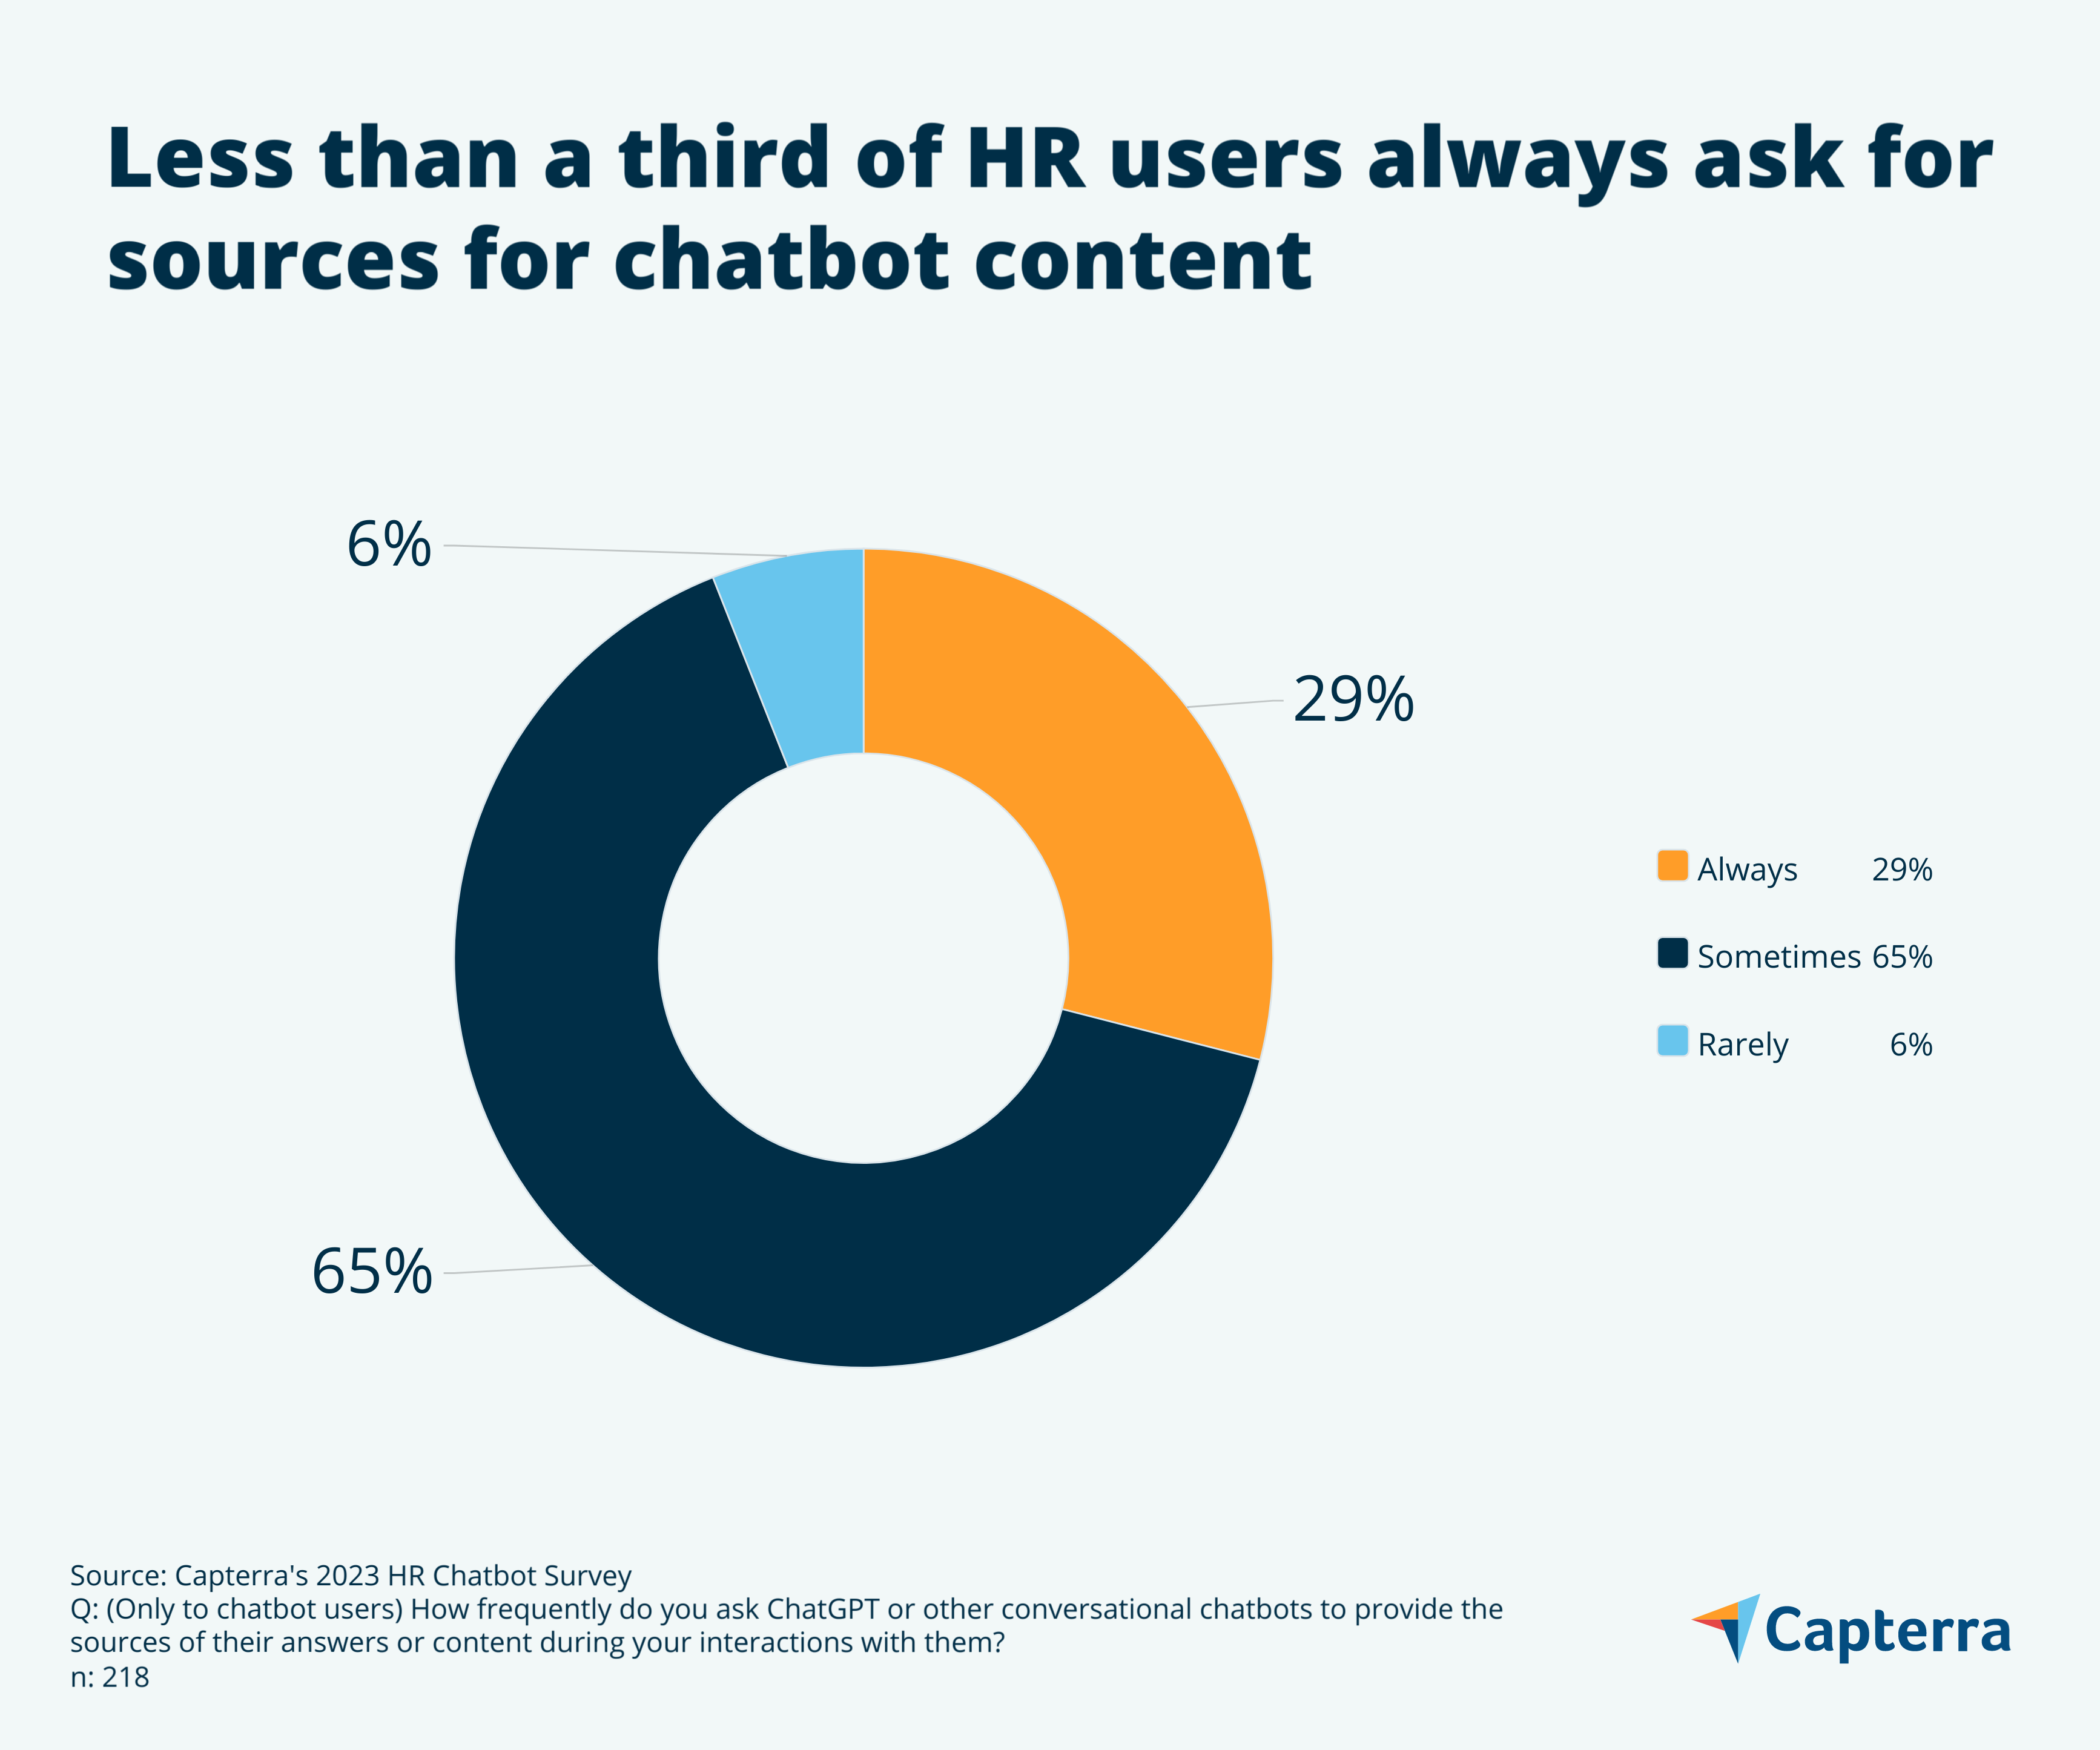 HR Users Cite Sources from ChatGPT